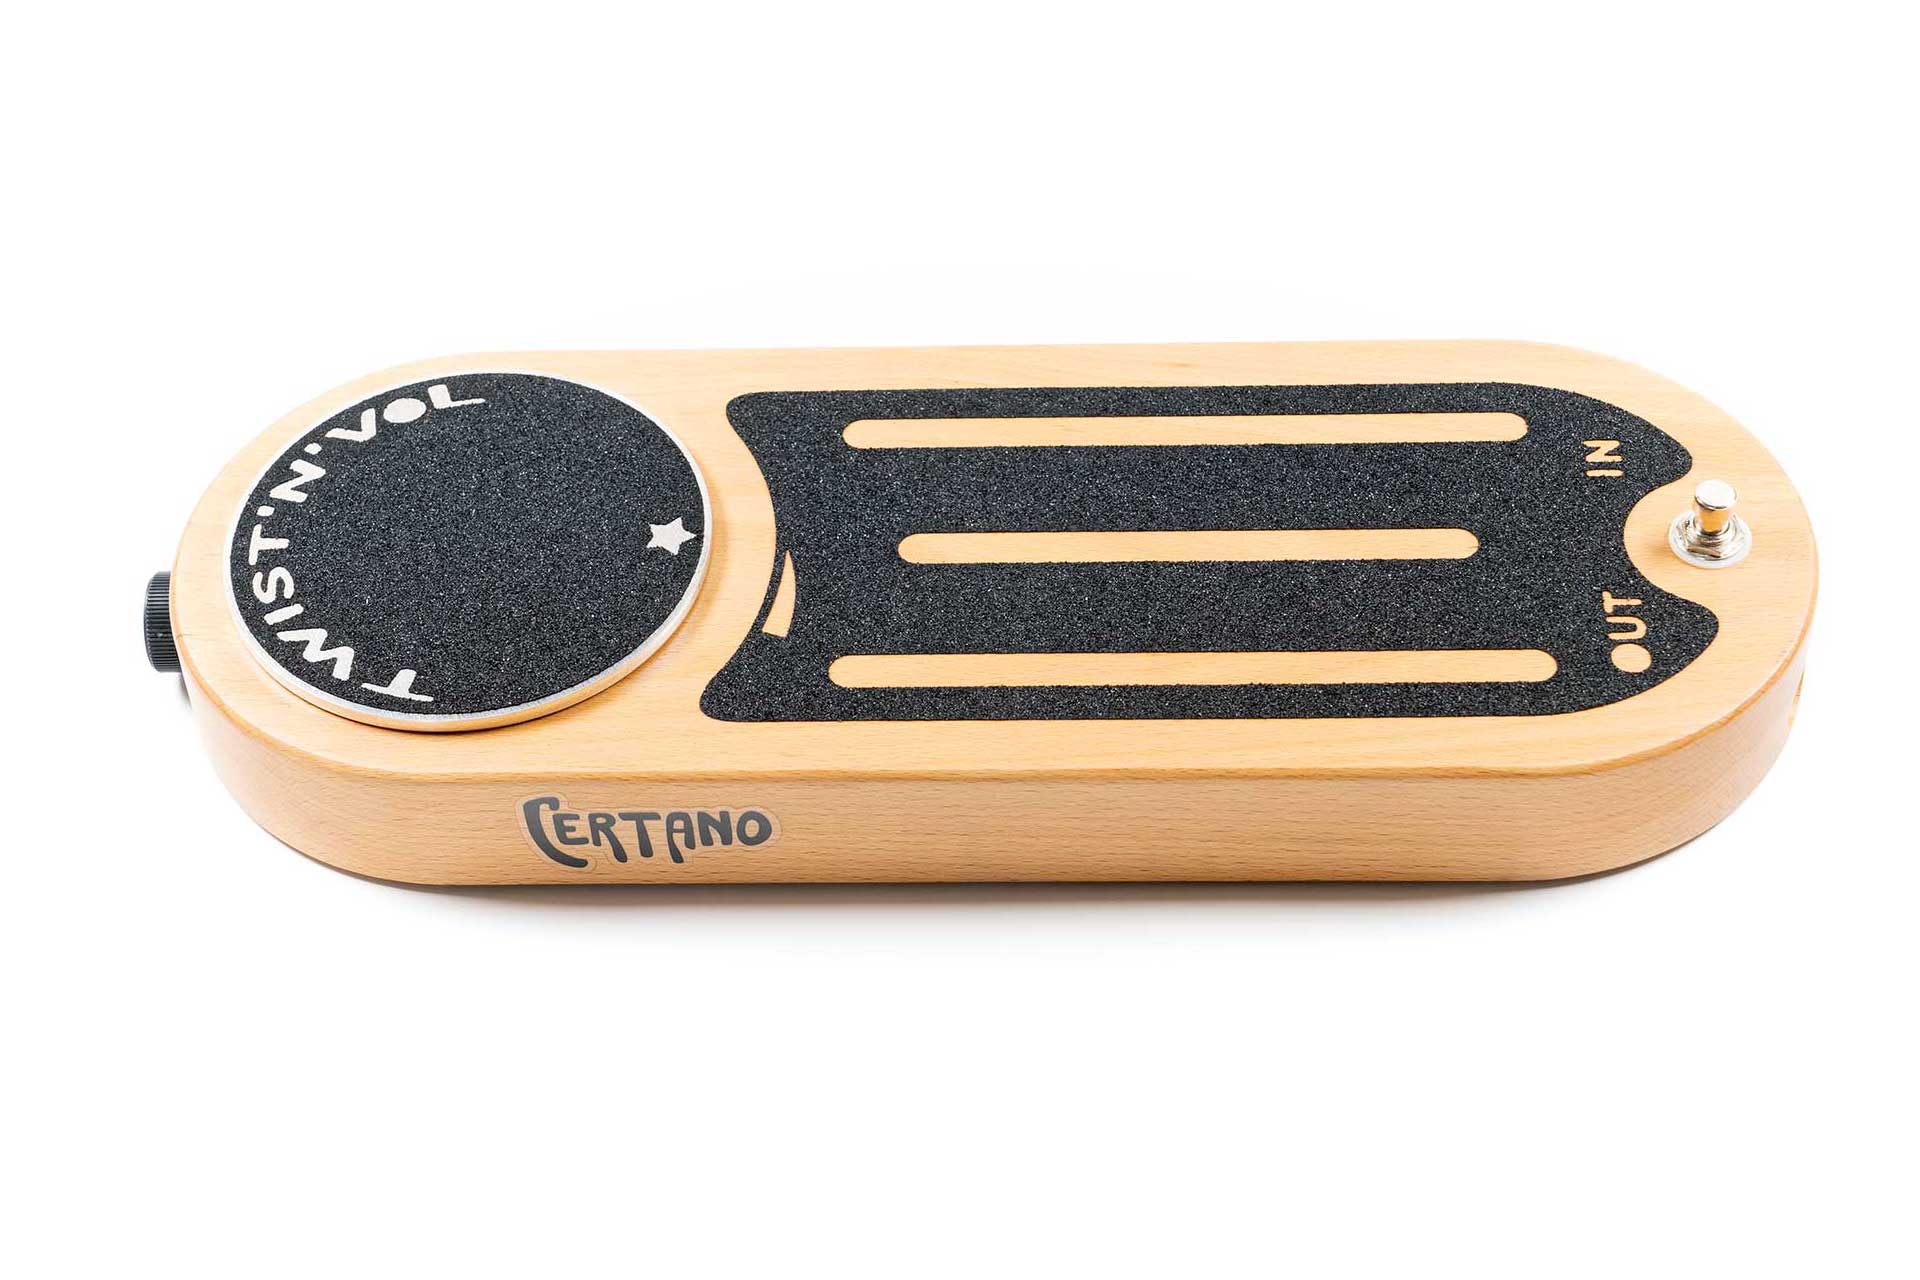 Certano Volume Pedal for Lap steel